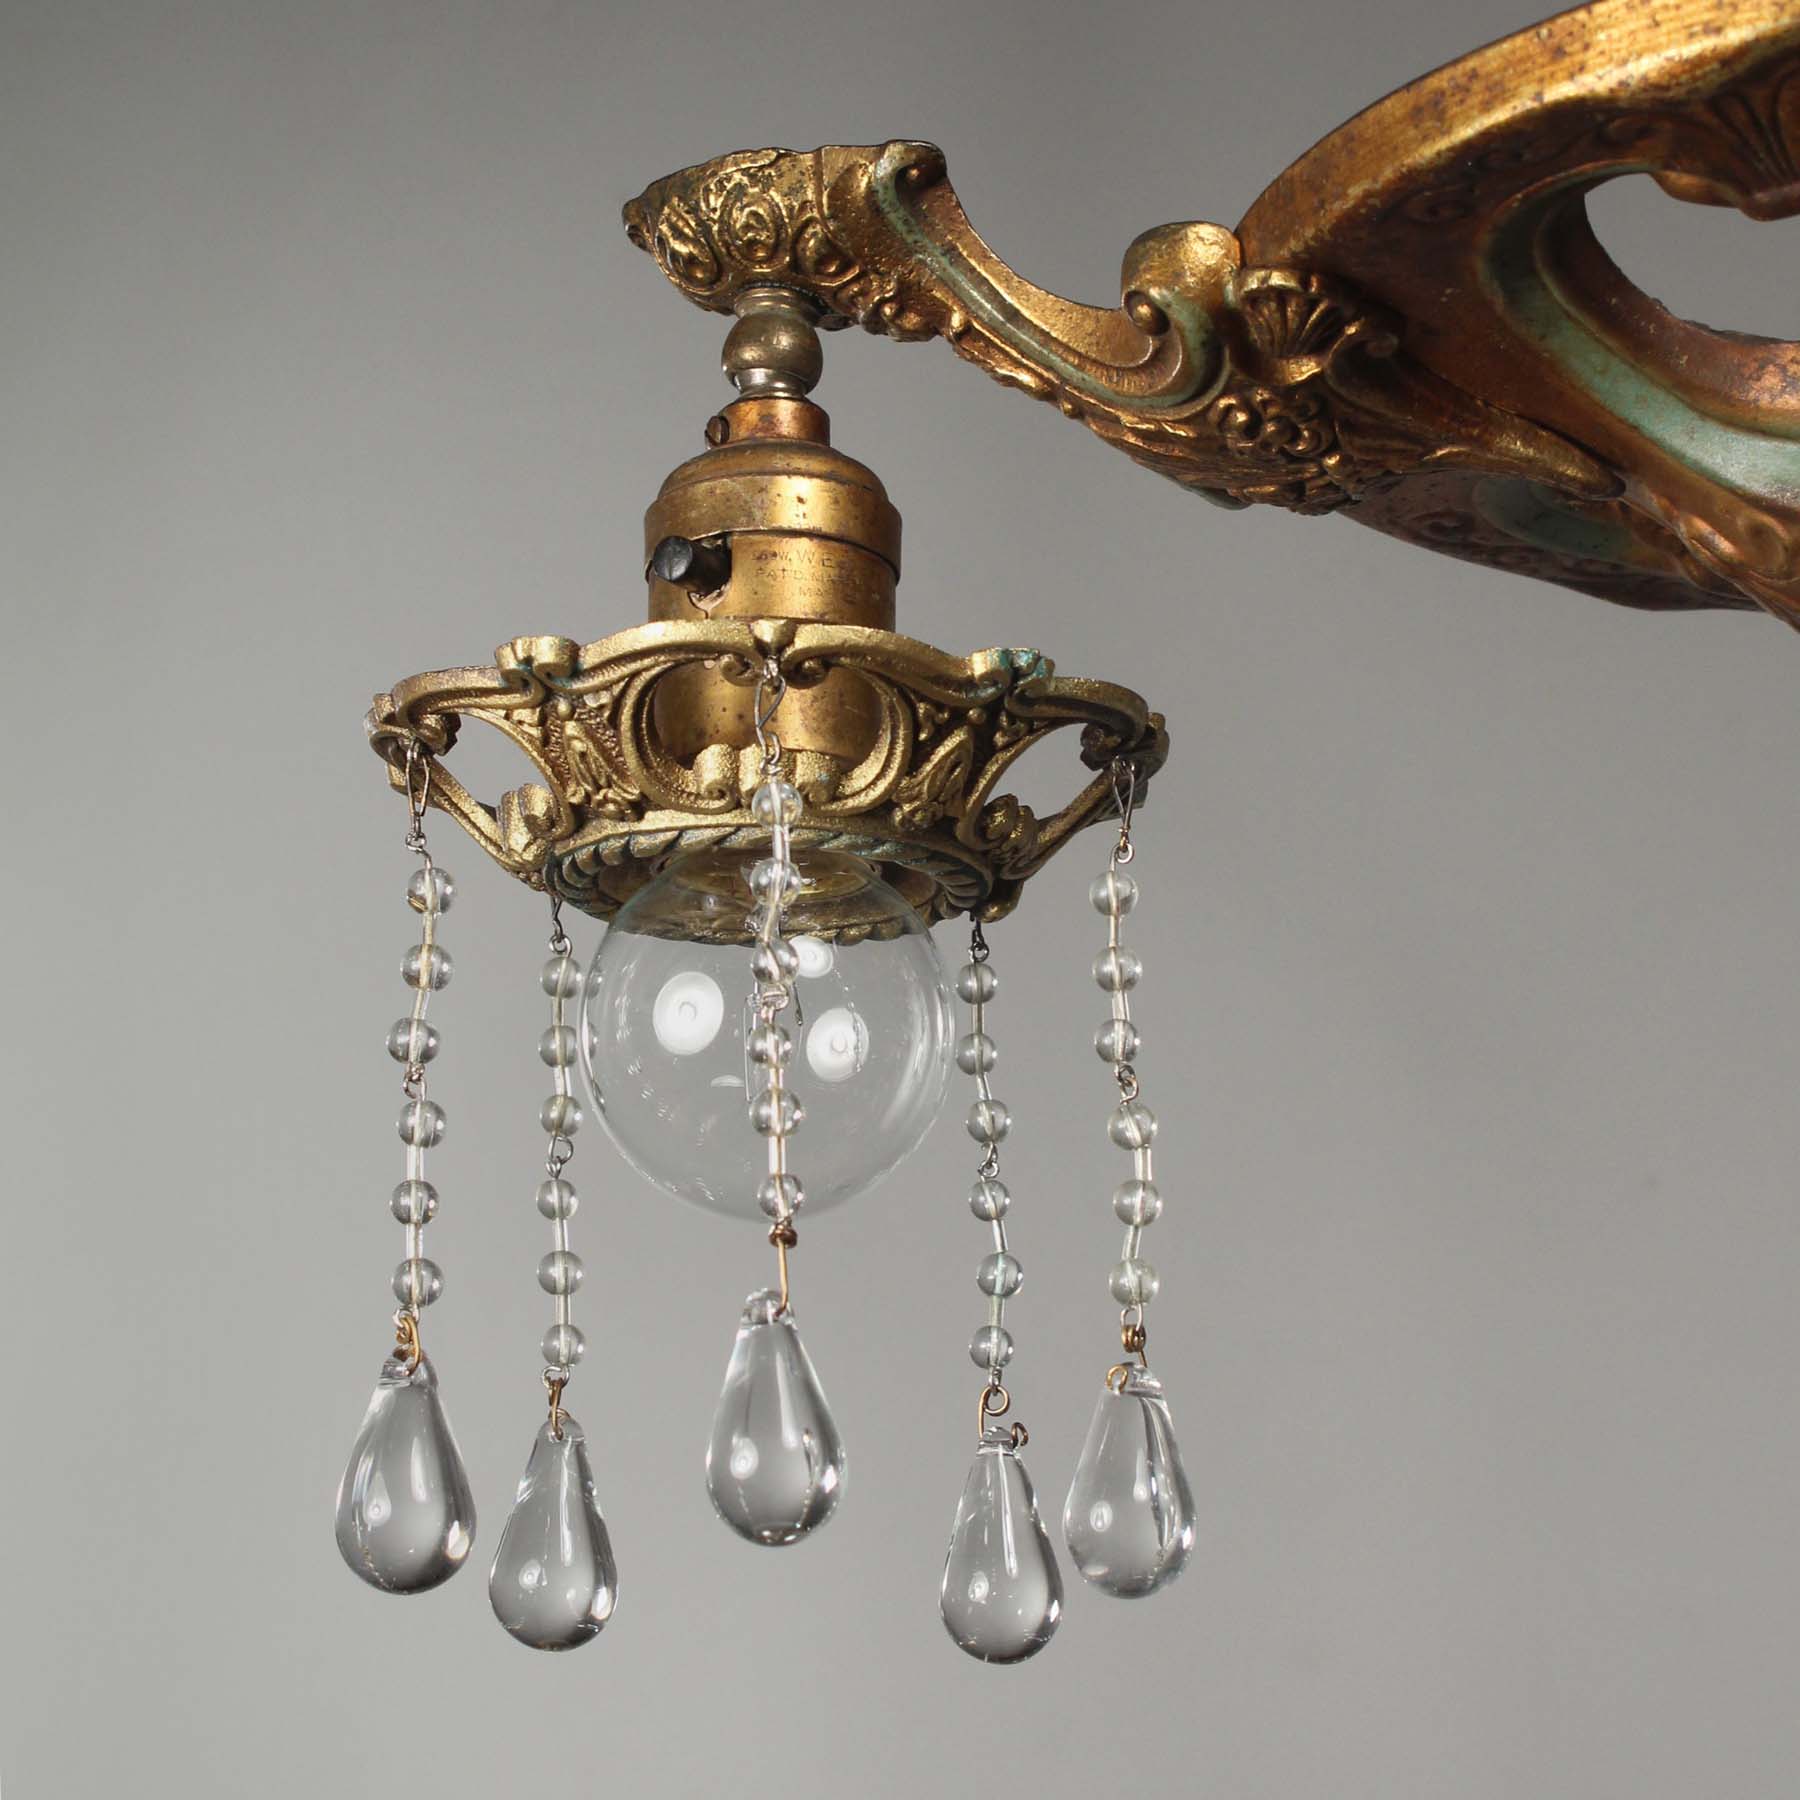 SOLD Antique Chandelier with Unusual Prisms, Early 1900s-67415